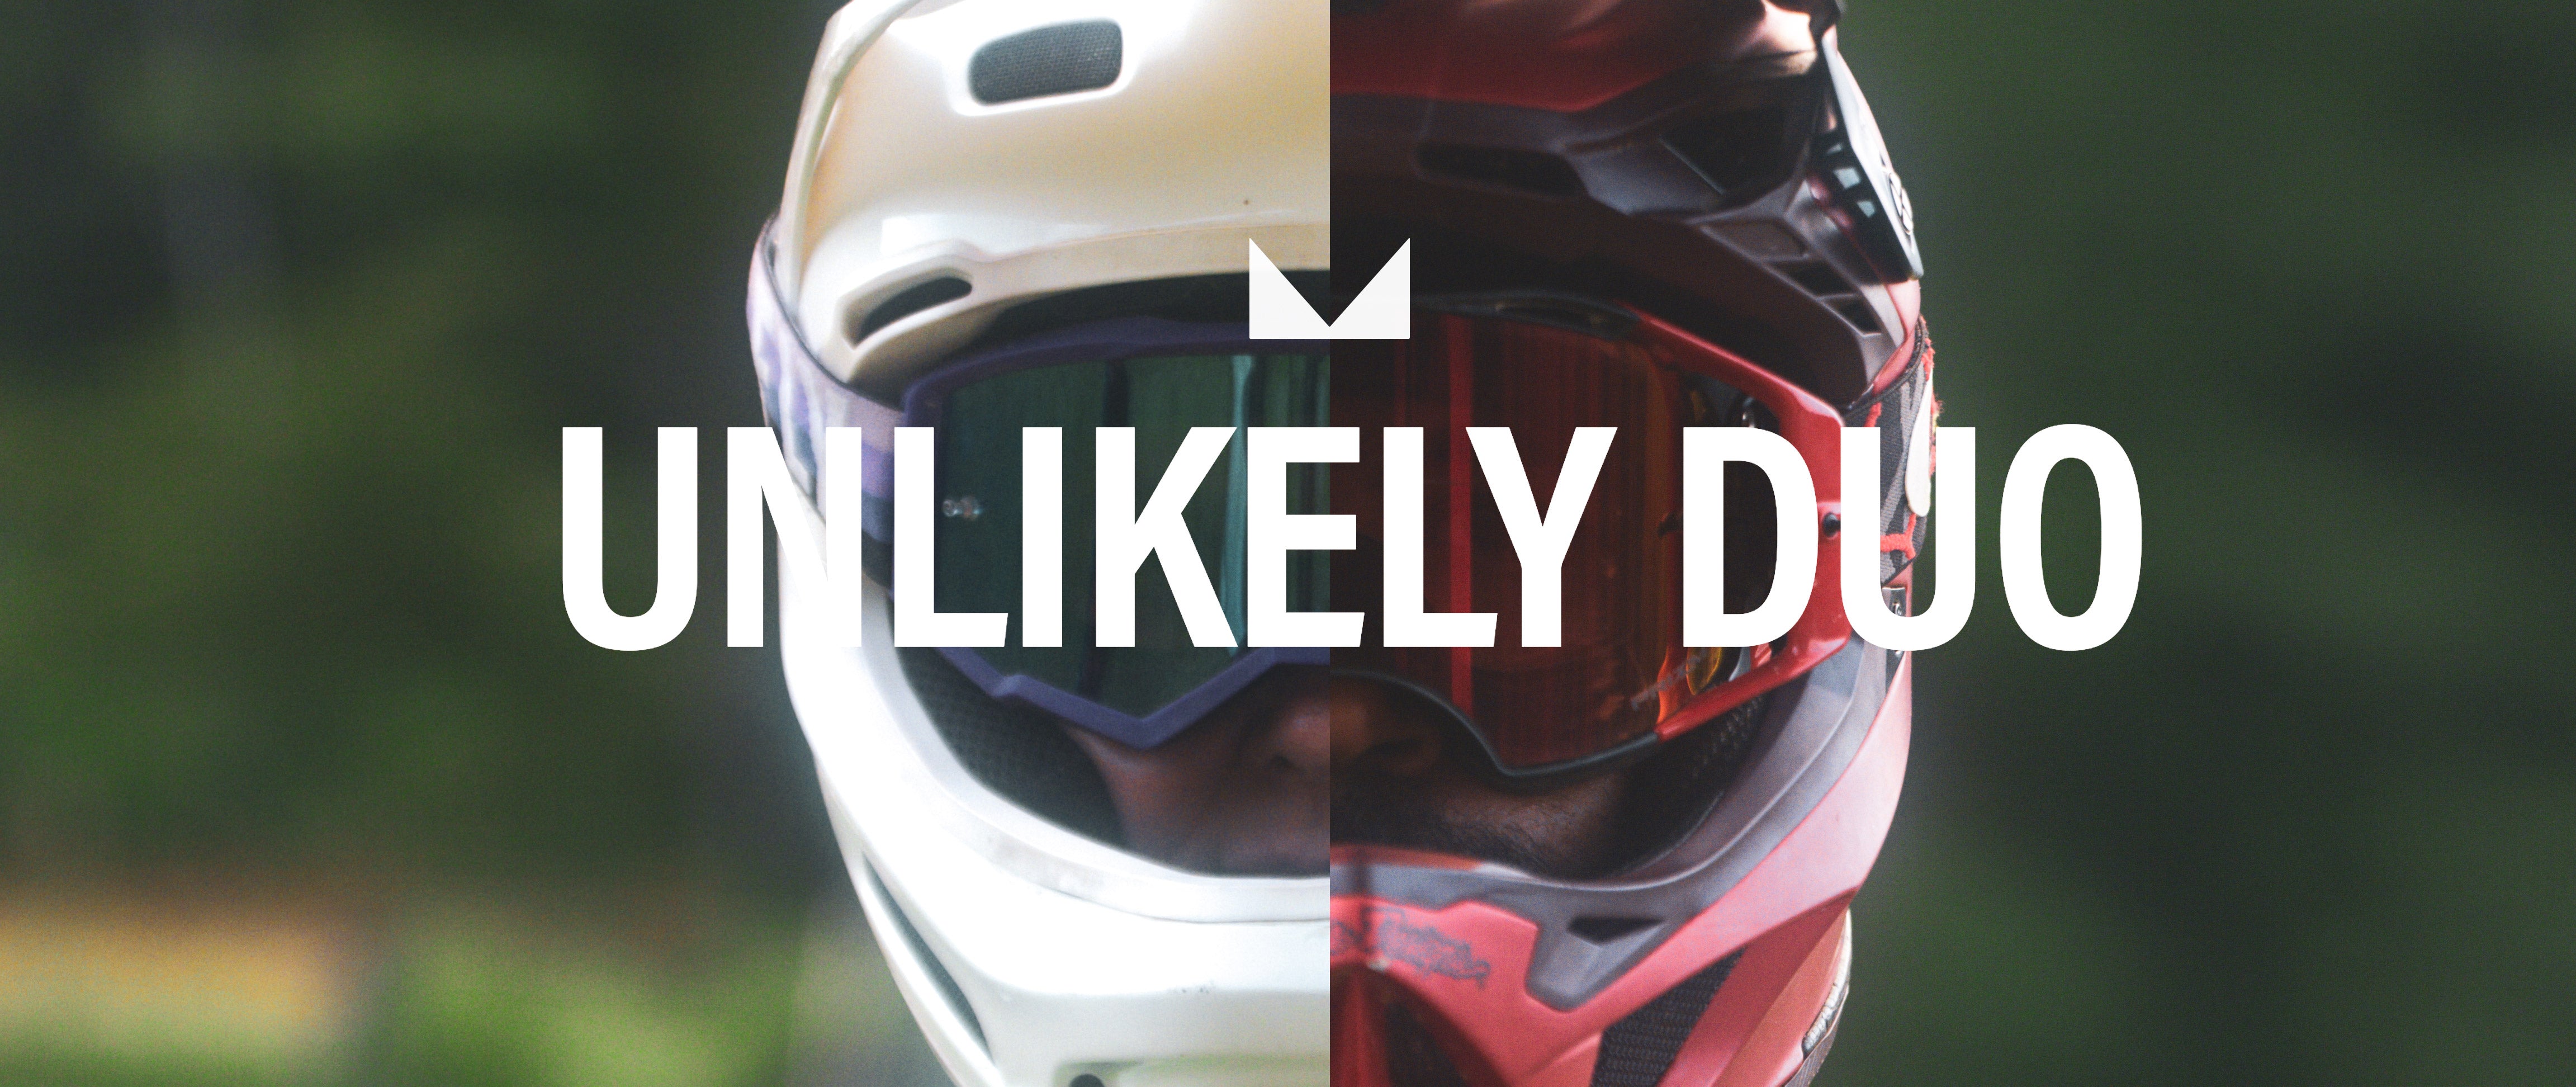 Evil Bikes presents Unlikely Duo. Watch the video now